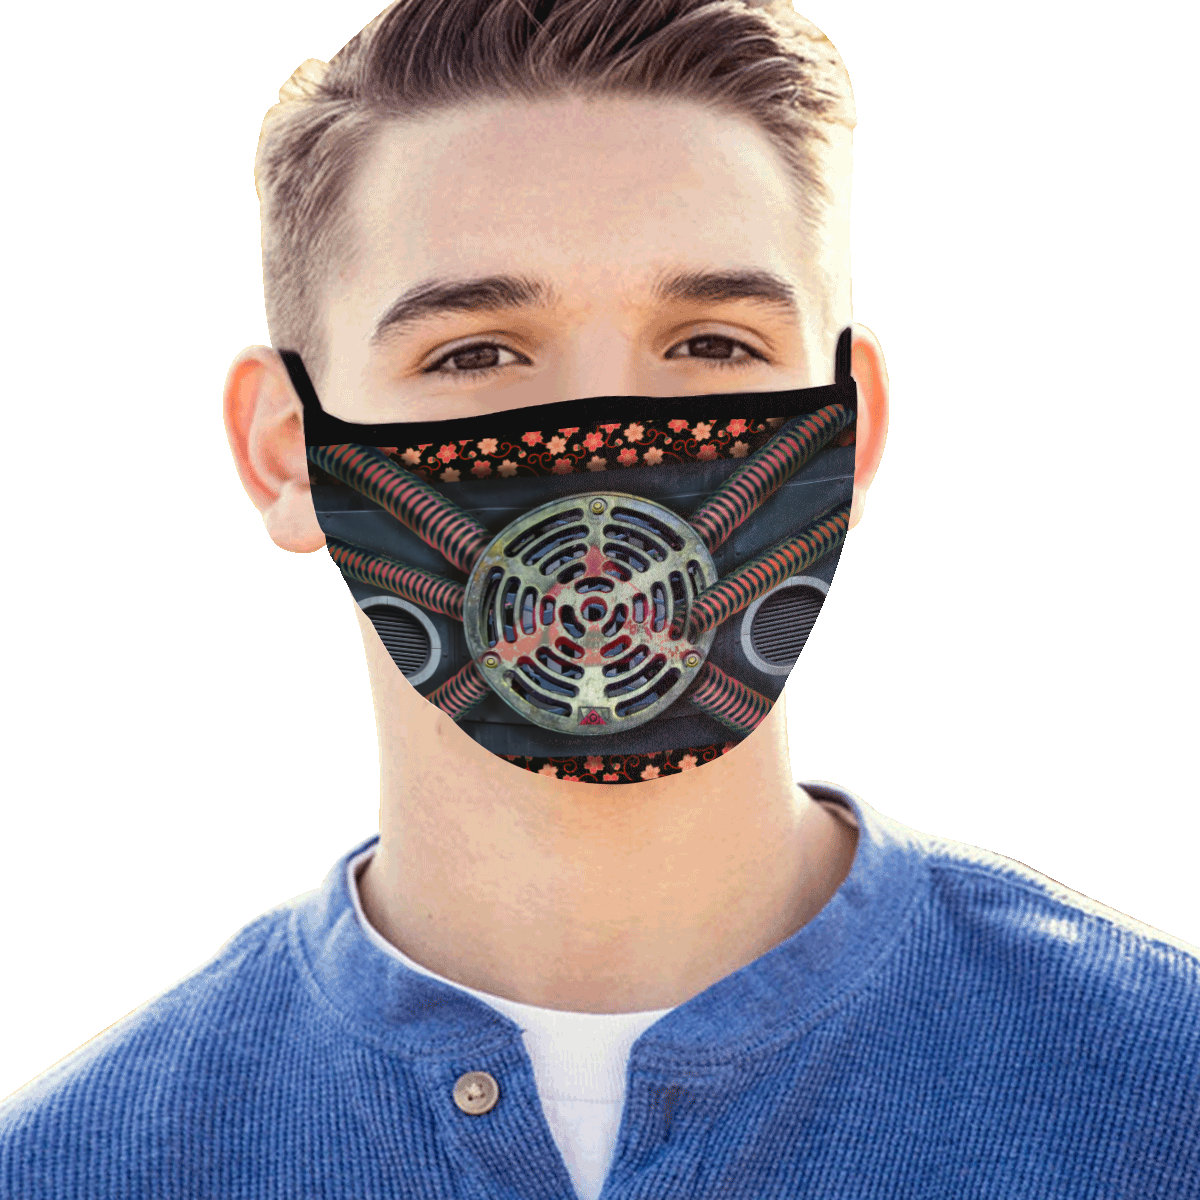 Peach Floral Mad Max Mouth Mask